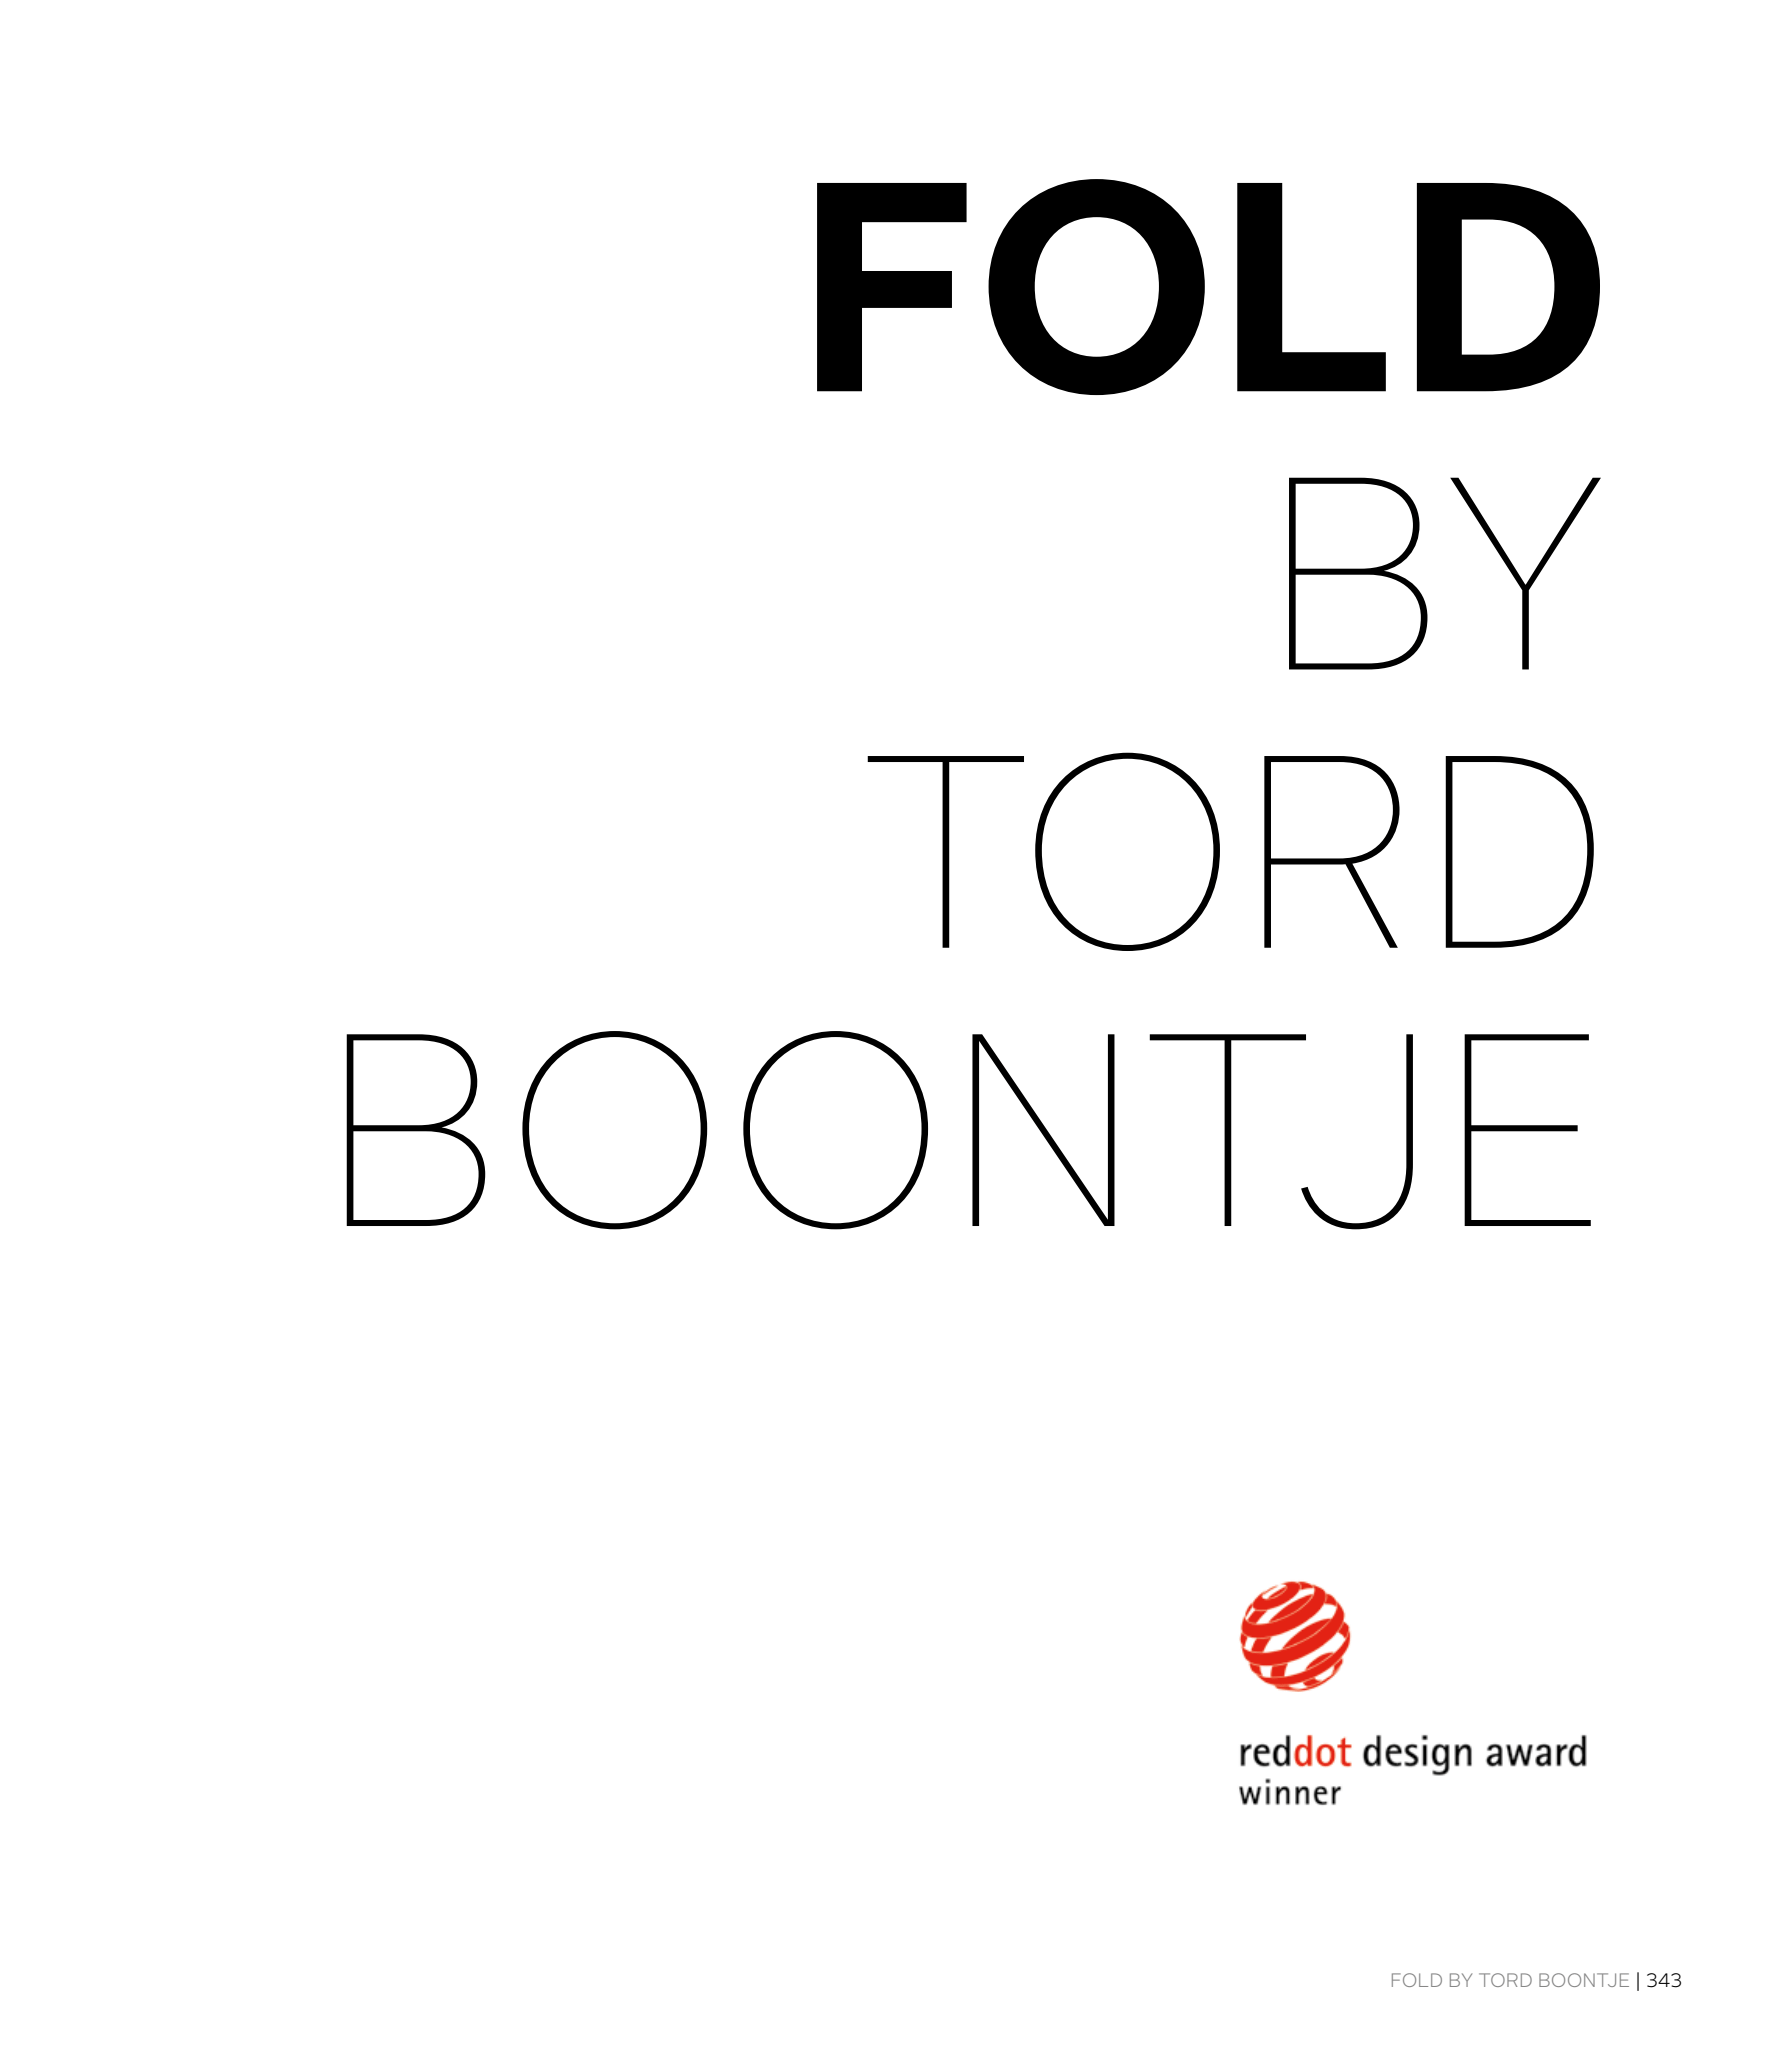 FOLD by Tord Boontje